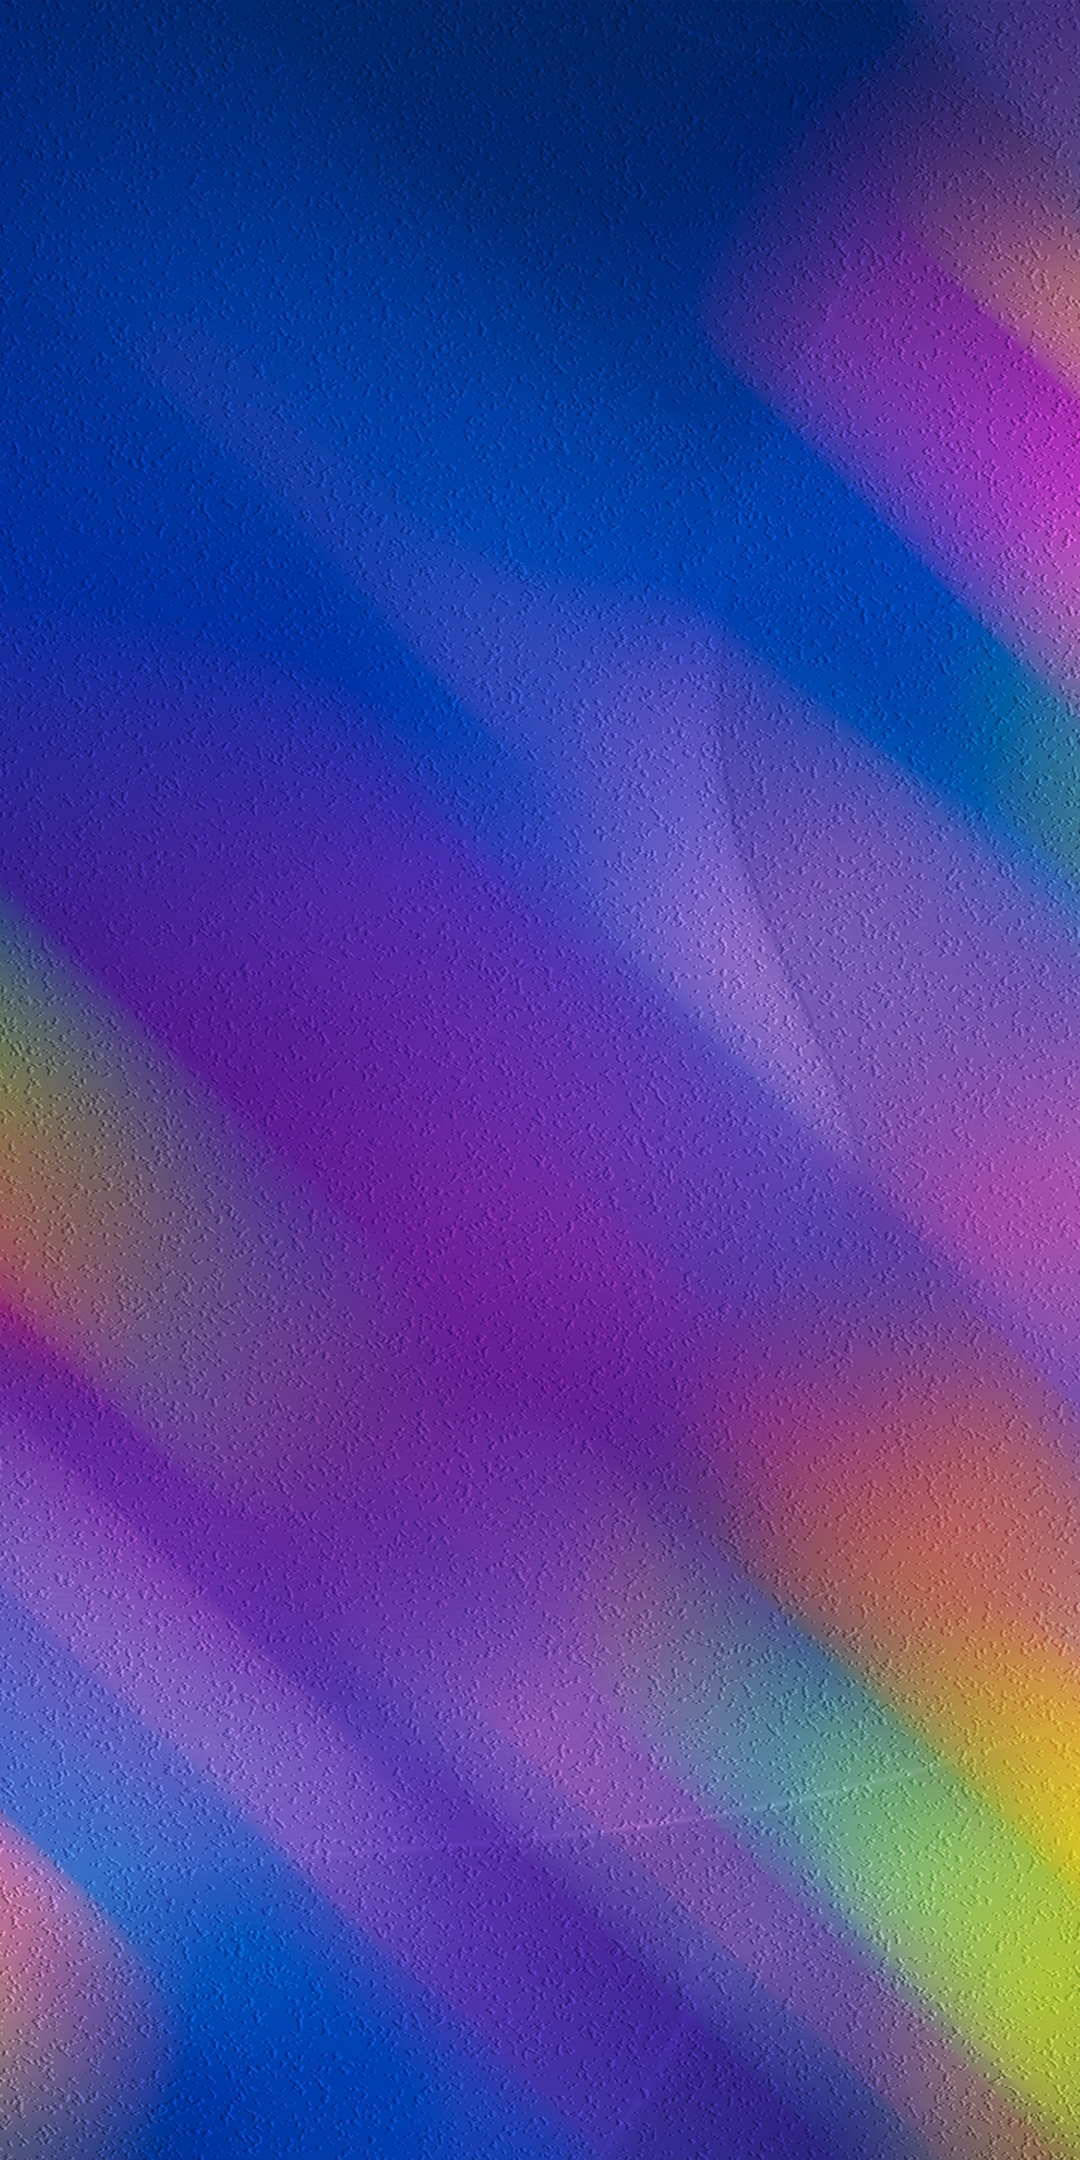 Blur, colorful spots, abstract, 1080x2160 wallpaper